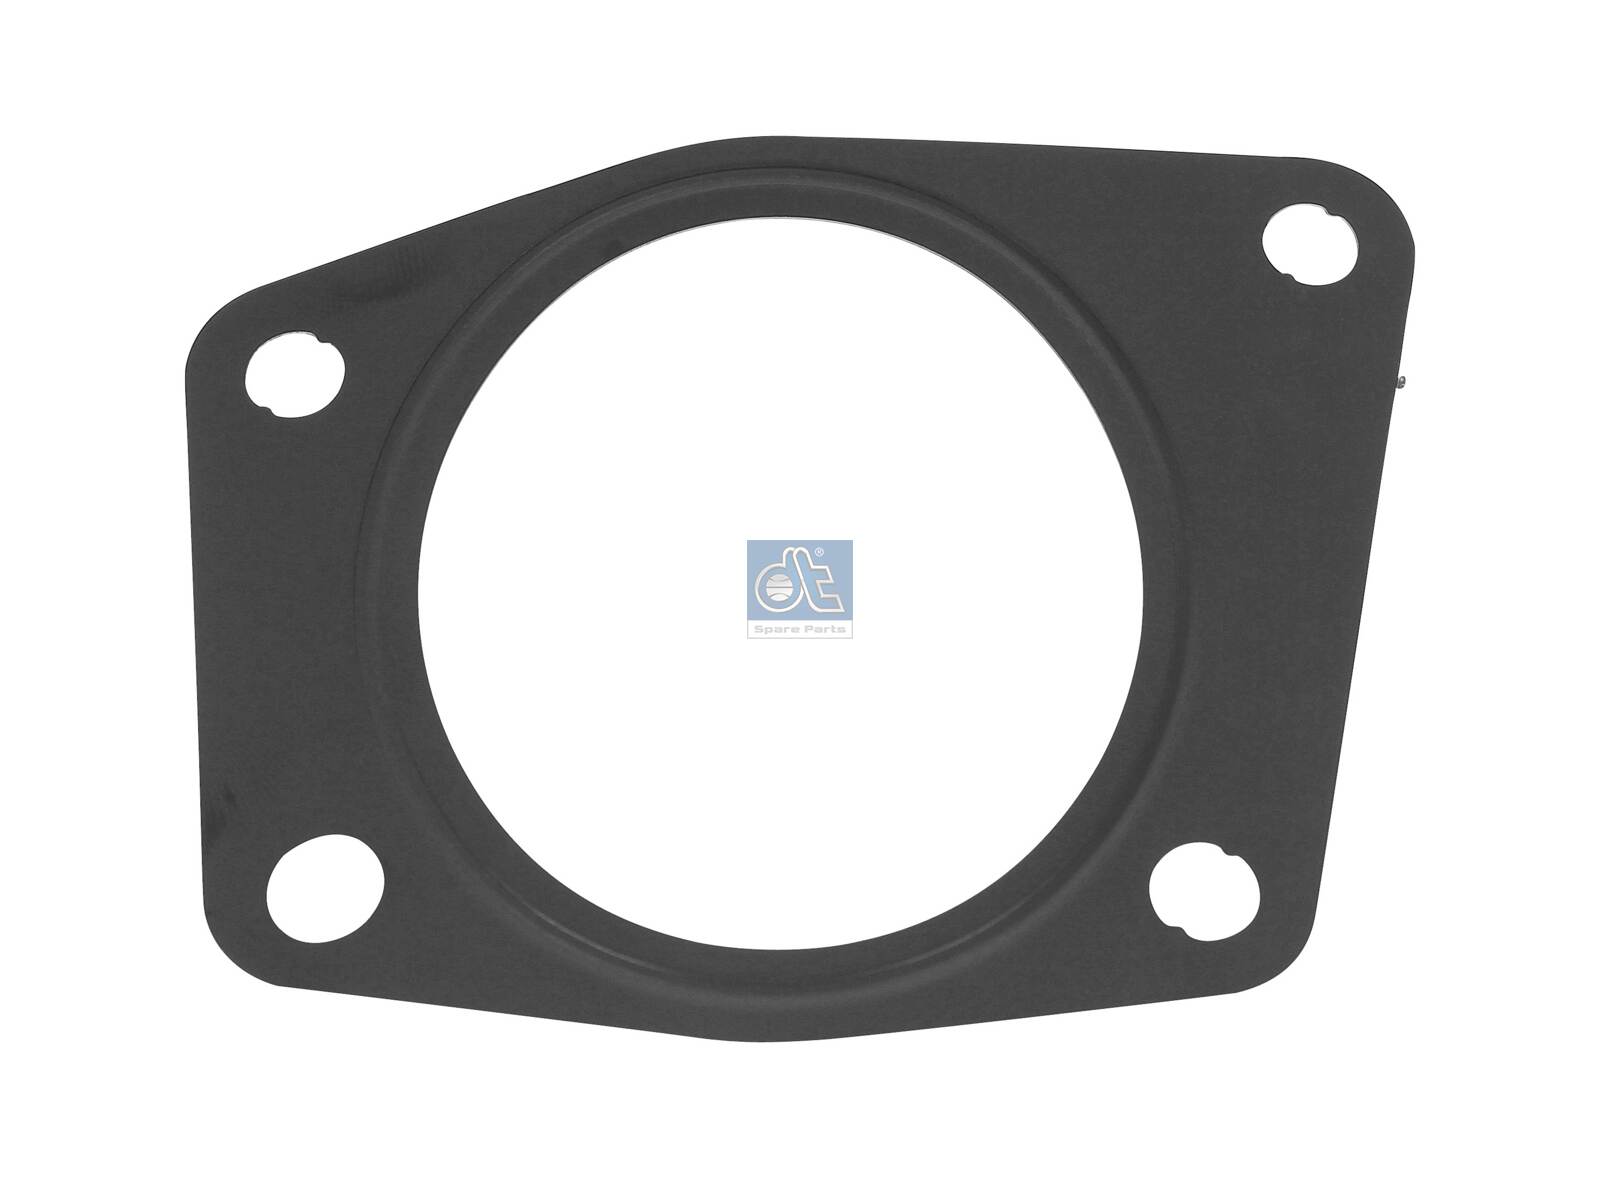 2.11428, Gasket, housing cover (crankcase), DT Spare Parts, 7408130185, 8130185, 034.197, 24805.5, 390.280, 70-10998-00, 81086, 24805.50, 70-38134-00, EPL-0185